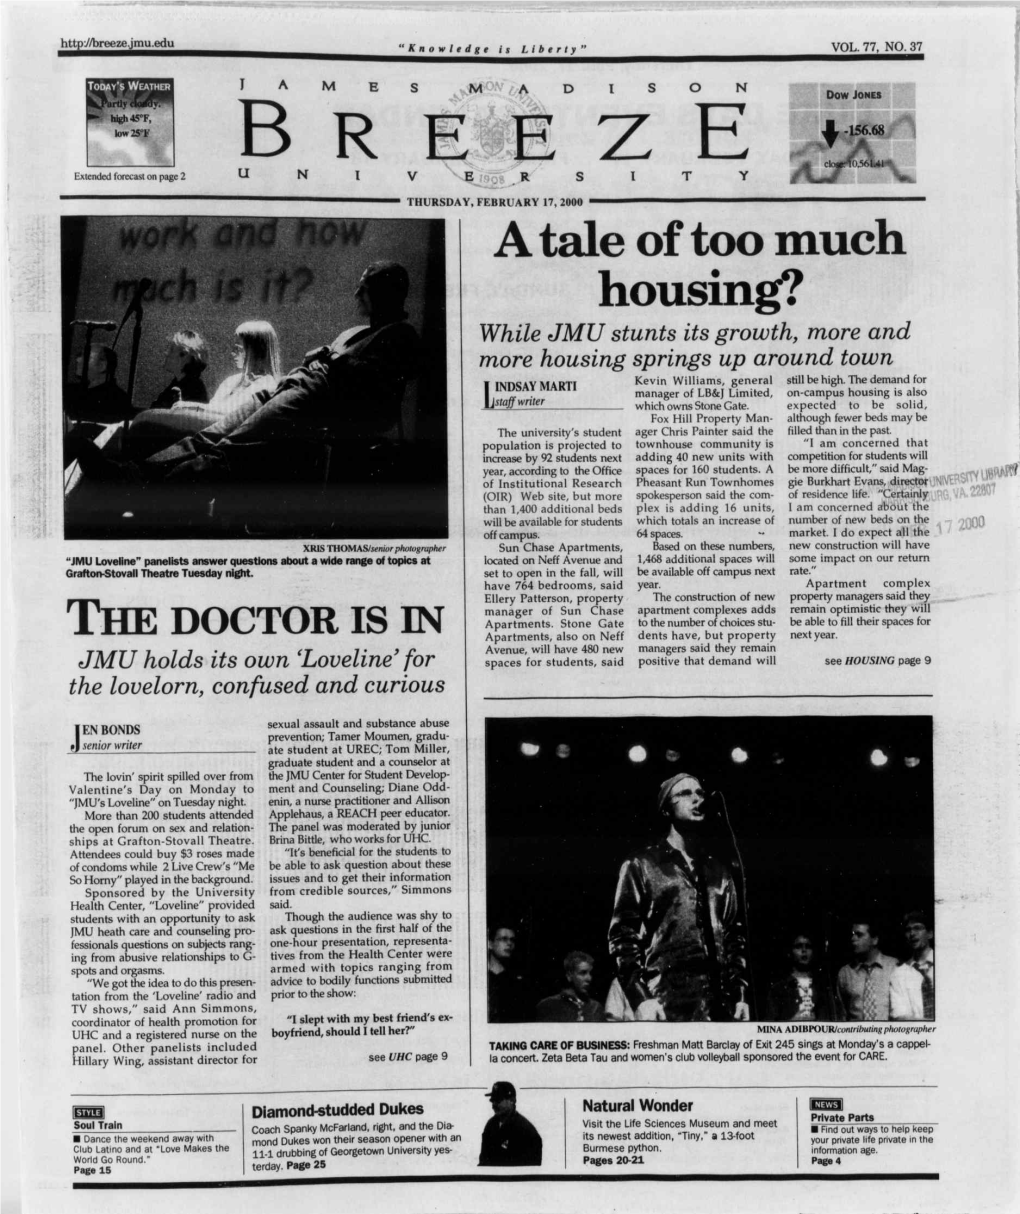 FEBRUARY 17, 2000 a Tale of Too Much Housing? While JMU Stunts Its Growth, More and More Housing Springs up Around Town Kevin Williams, General Still Be High